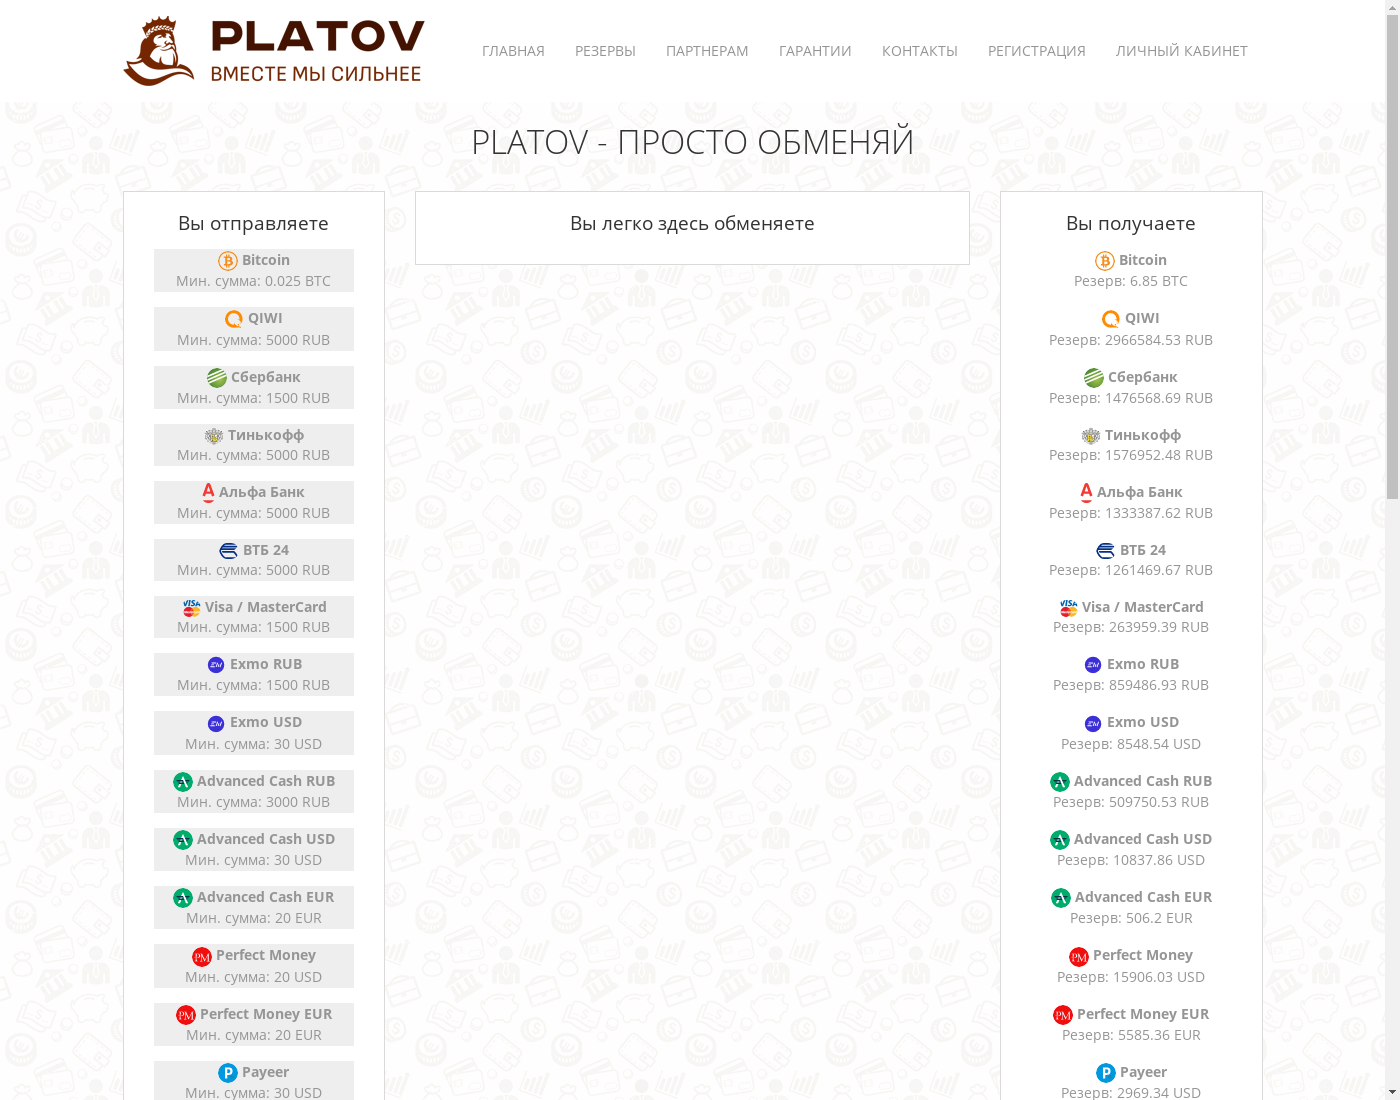 platov user interface: the home page in English